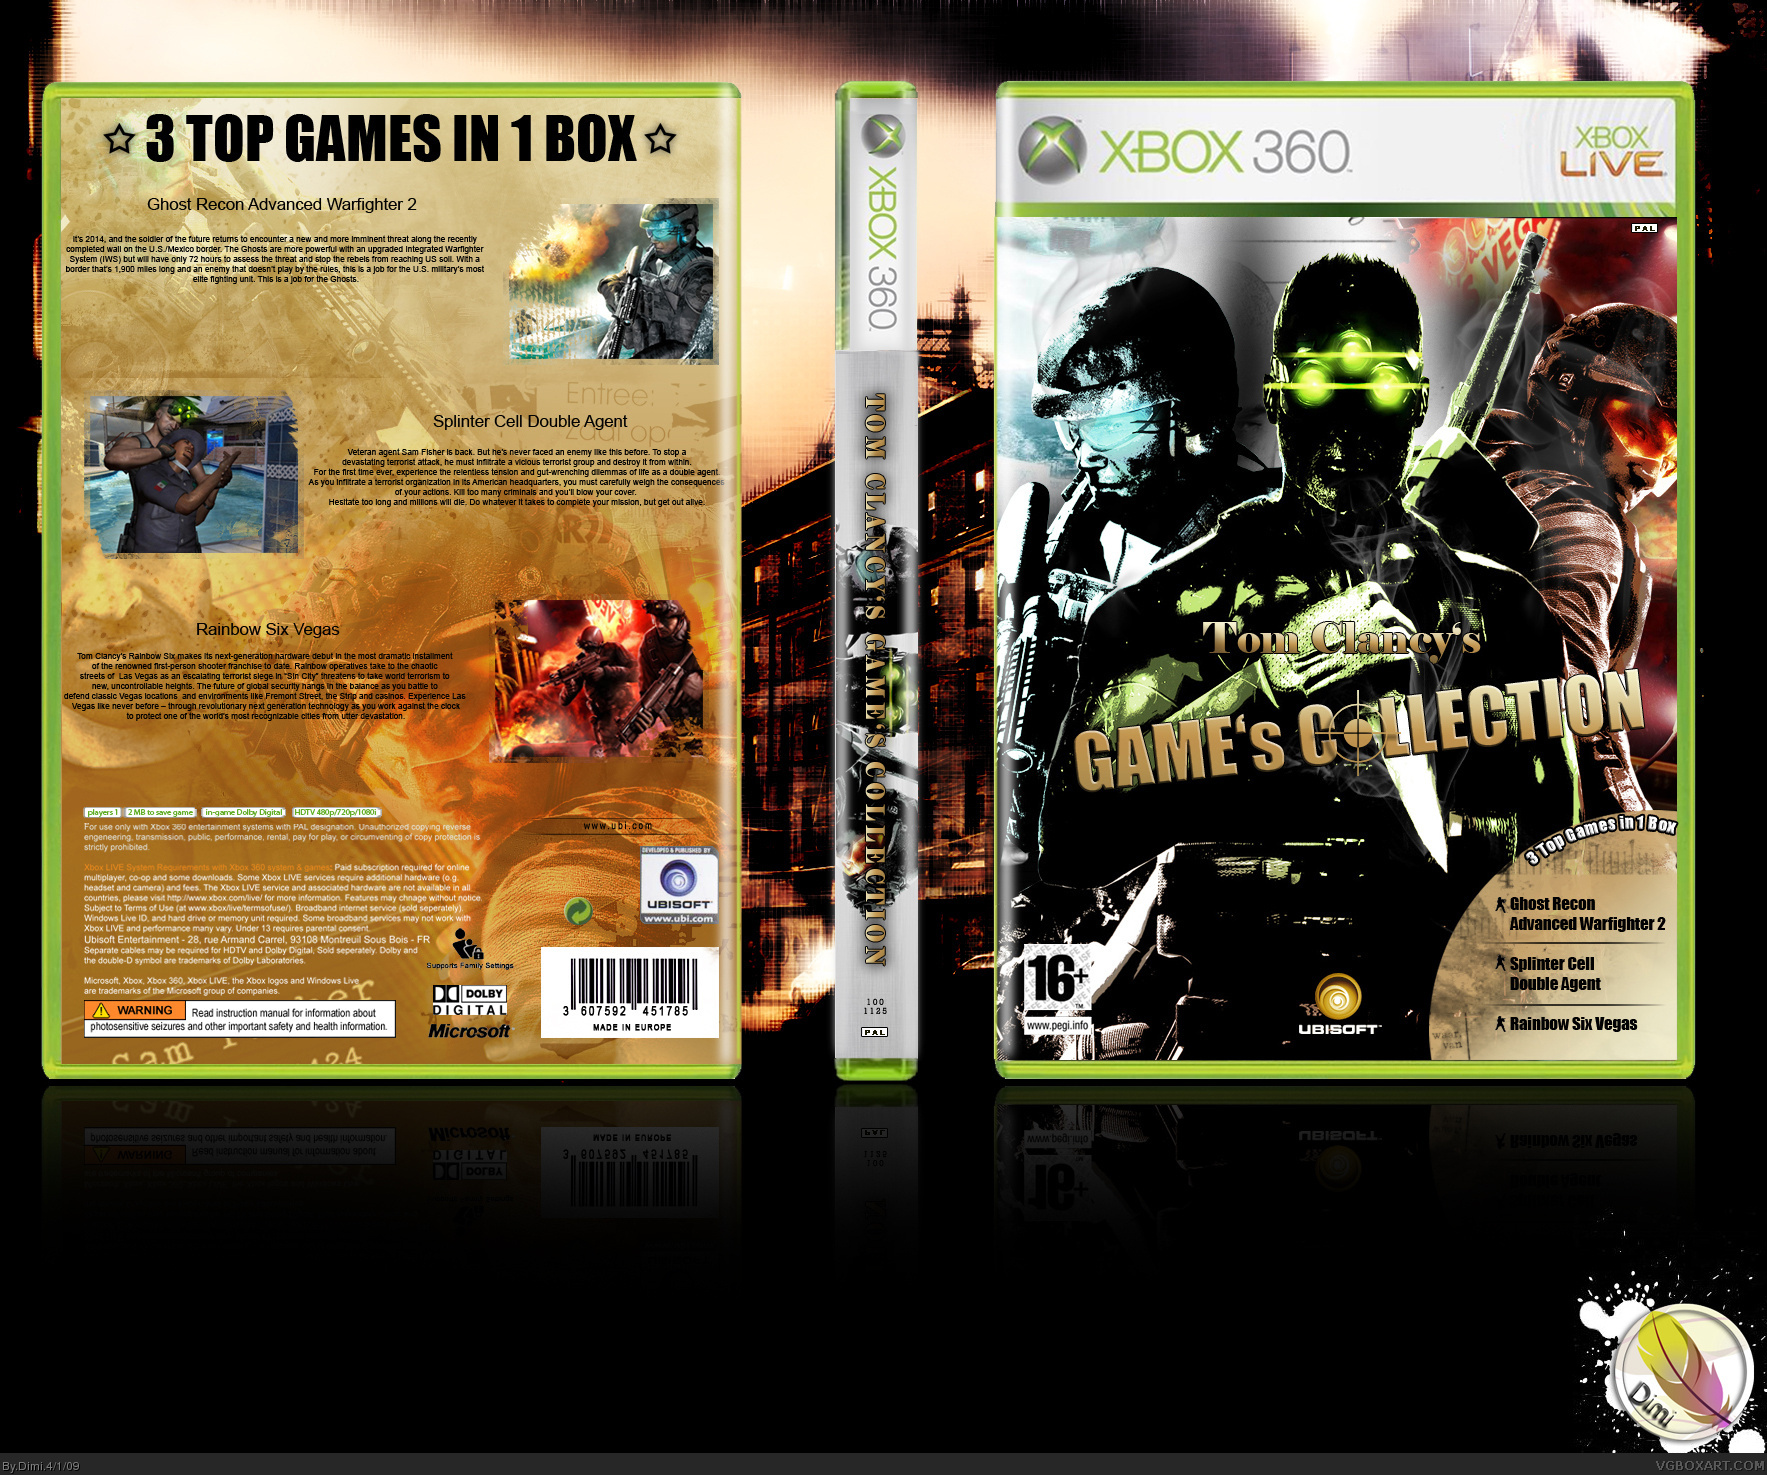 Tom Clancy's Game's Collection box cover